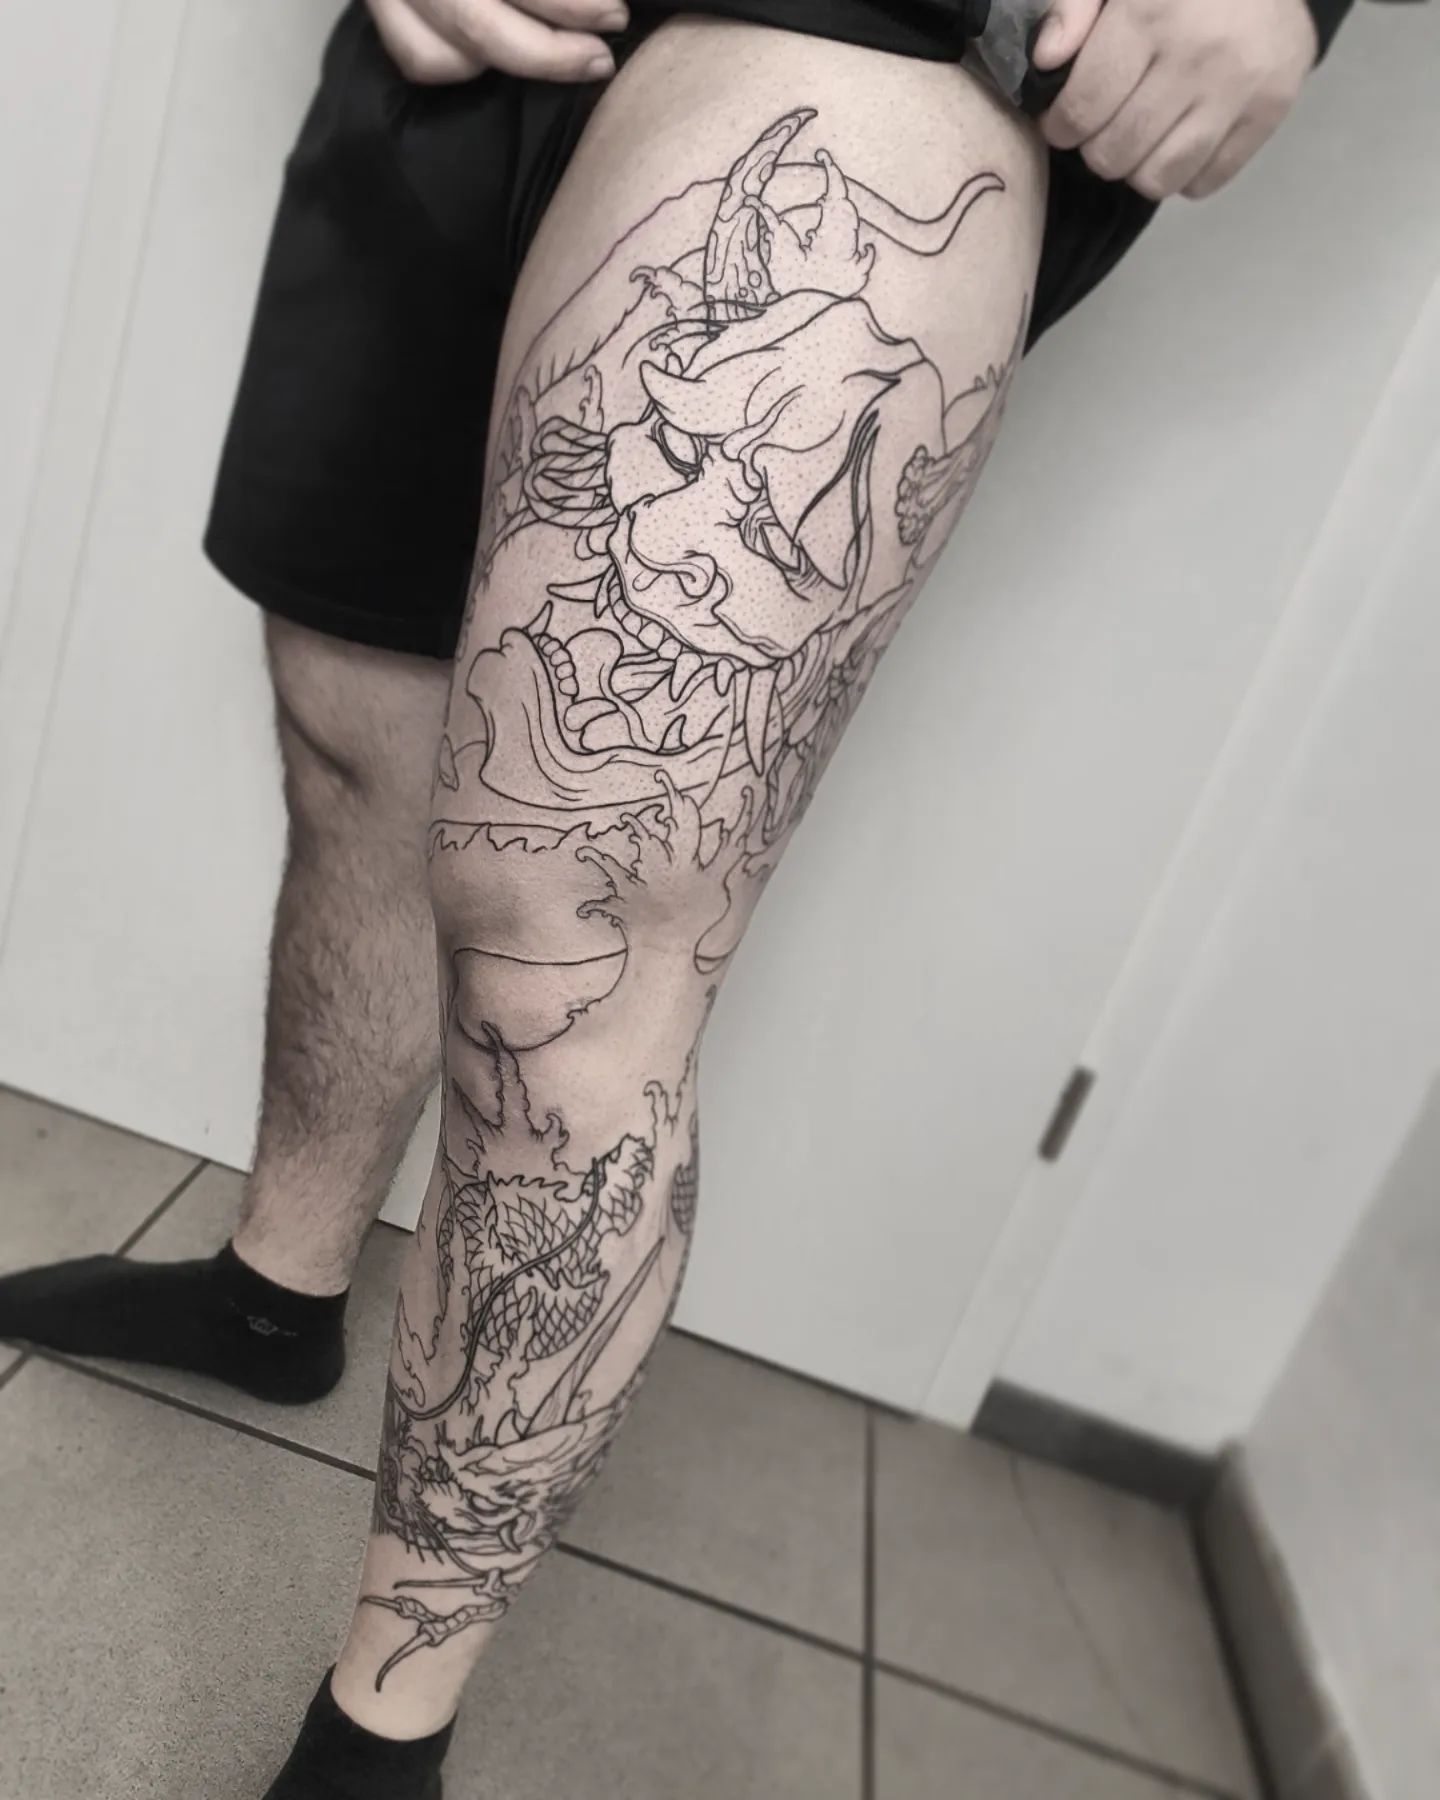 Made some progress with the lines on @teycanx 's neojapanese leg. So much fun
.